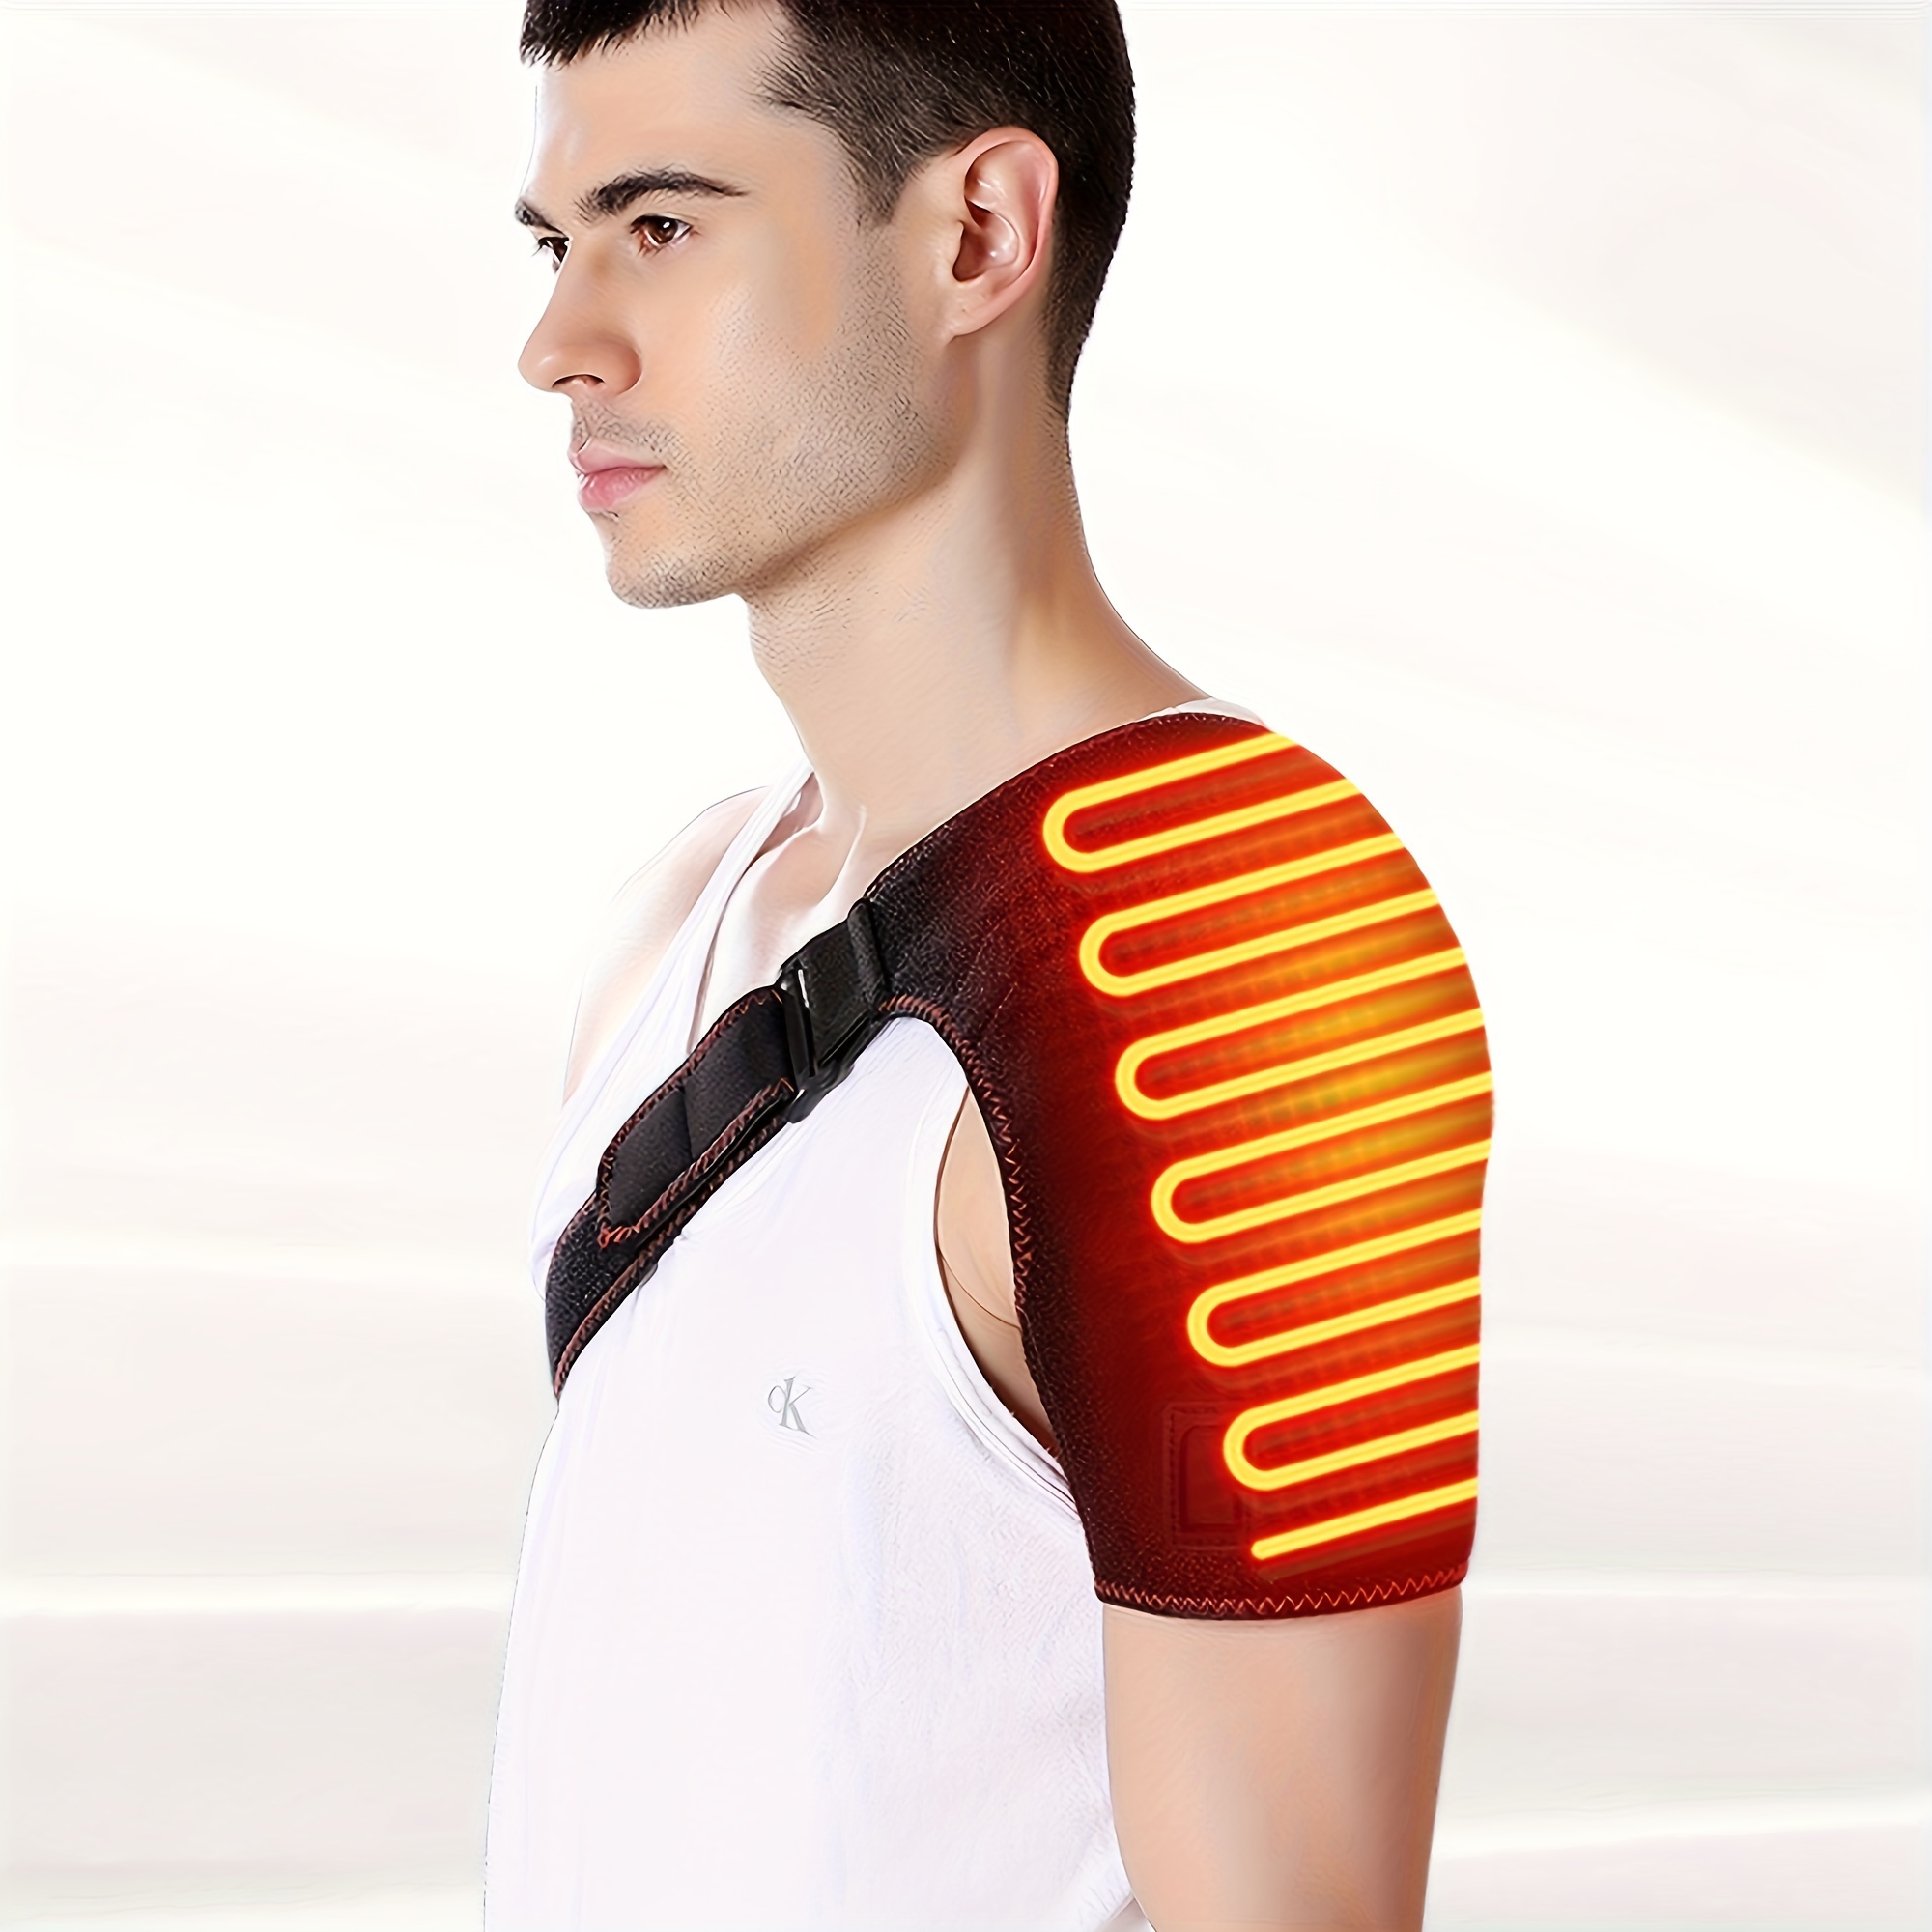 Order A Size Up, Shoulder Brace - Copper Infused Immobilizer For Torn  Rotator Cuff, AC, Dislocation, Arm Stability, Injuries & Tears - Adjustable  Fit